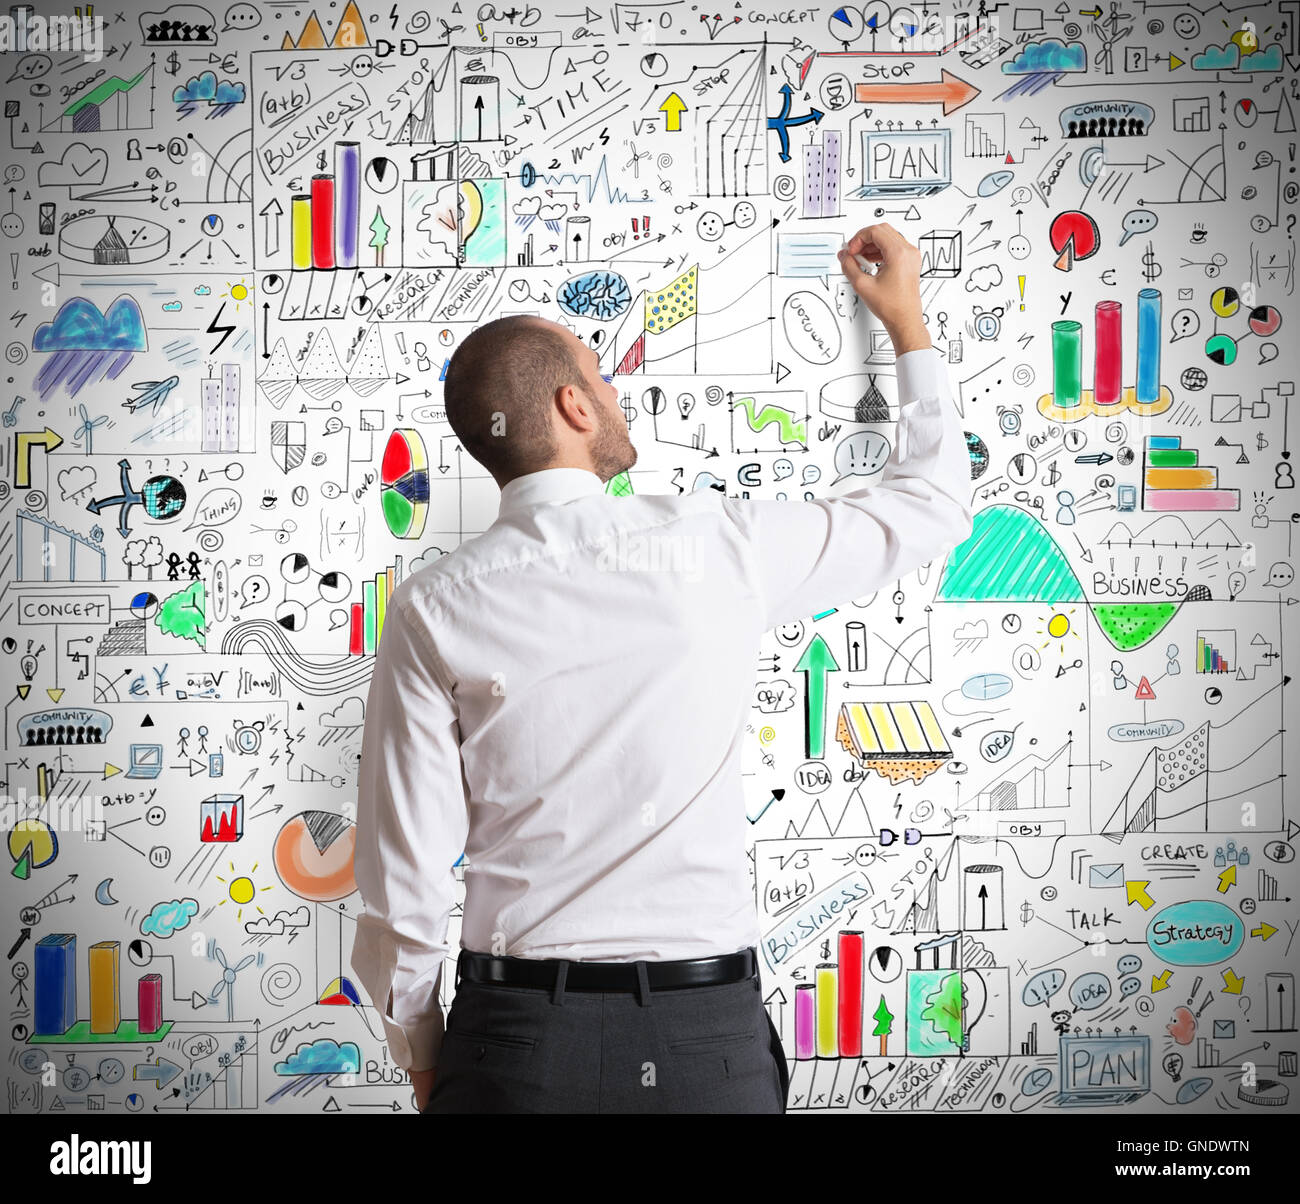 Business Concepts Stock Photo